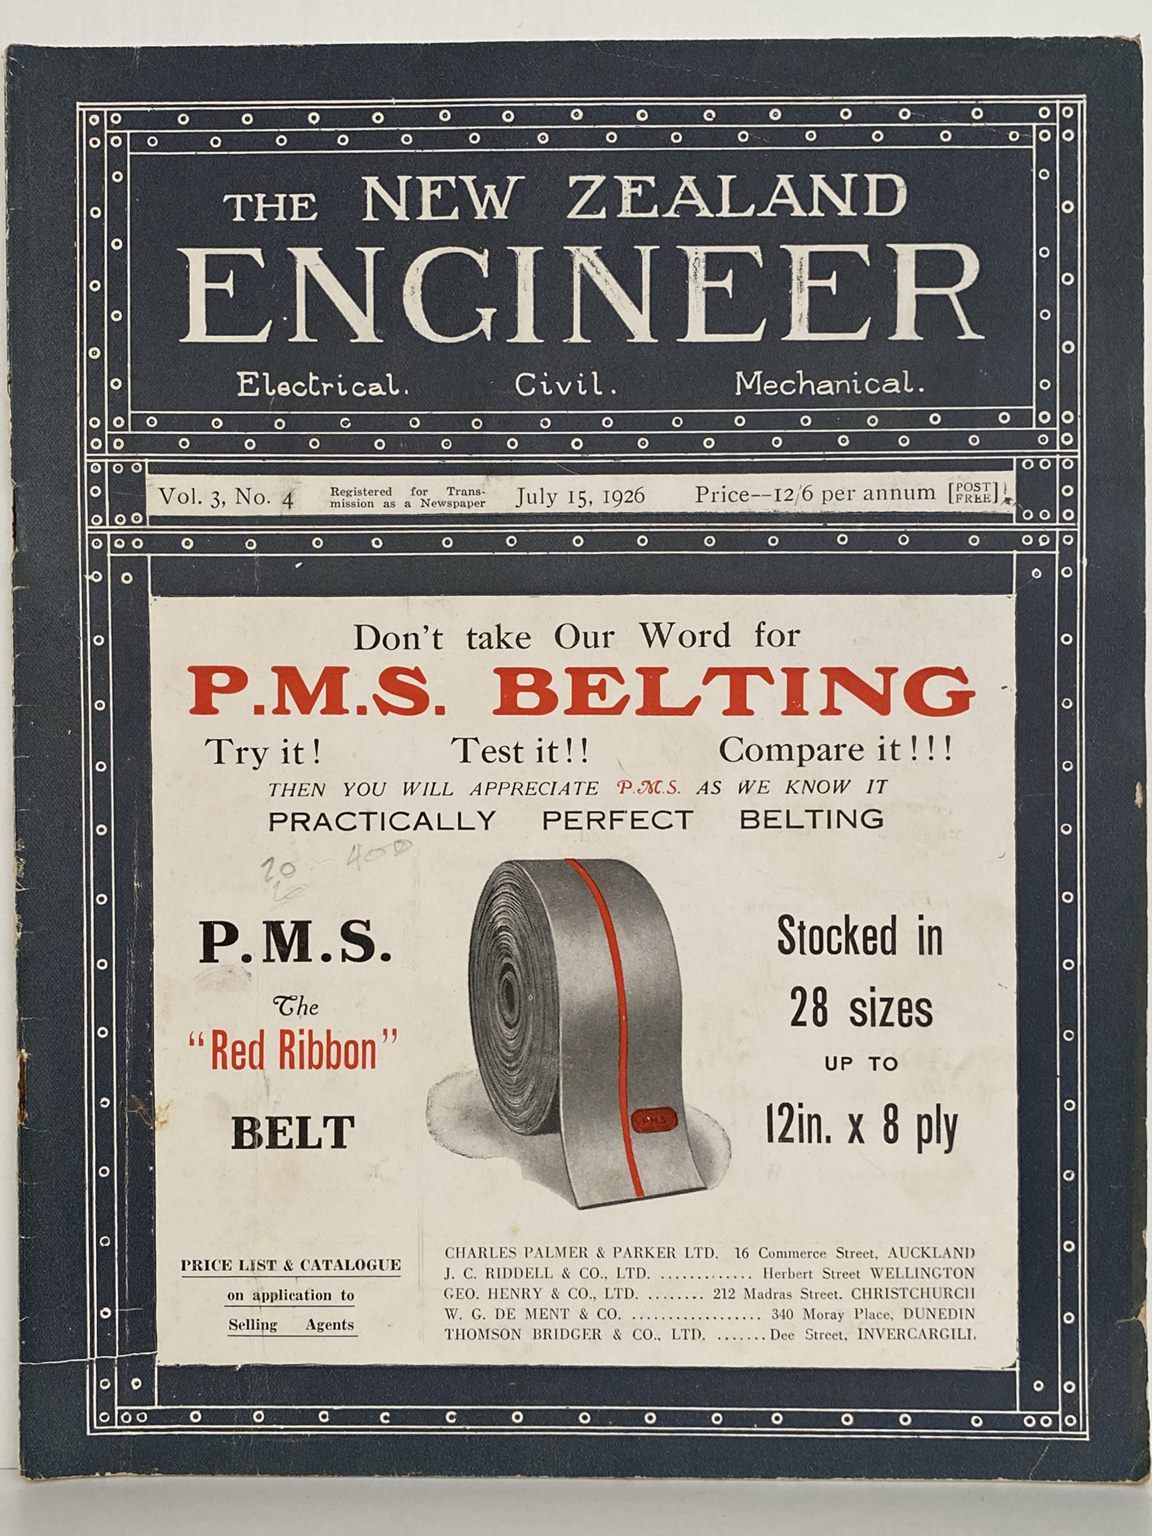 OLD MAGAZINE: The New Zealand Engineer Vol. 3, No. 4 - 15 July 1926